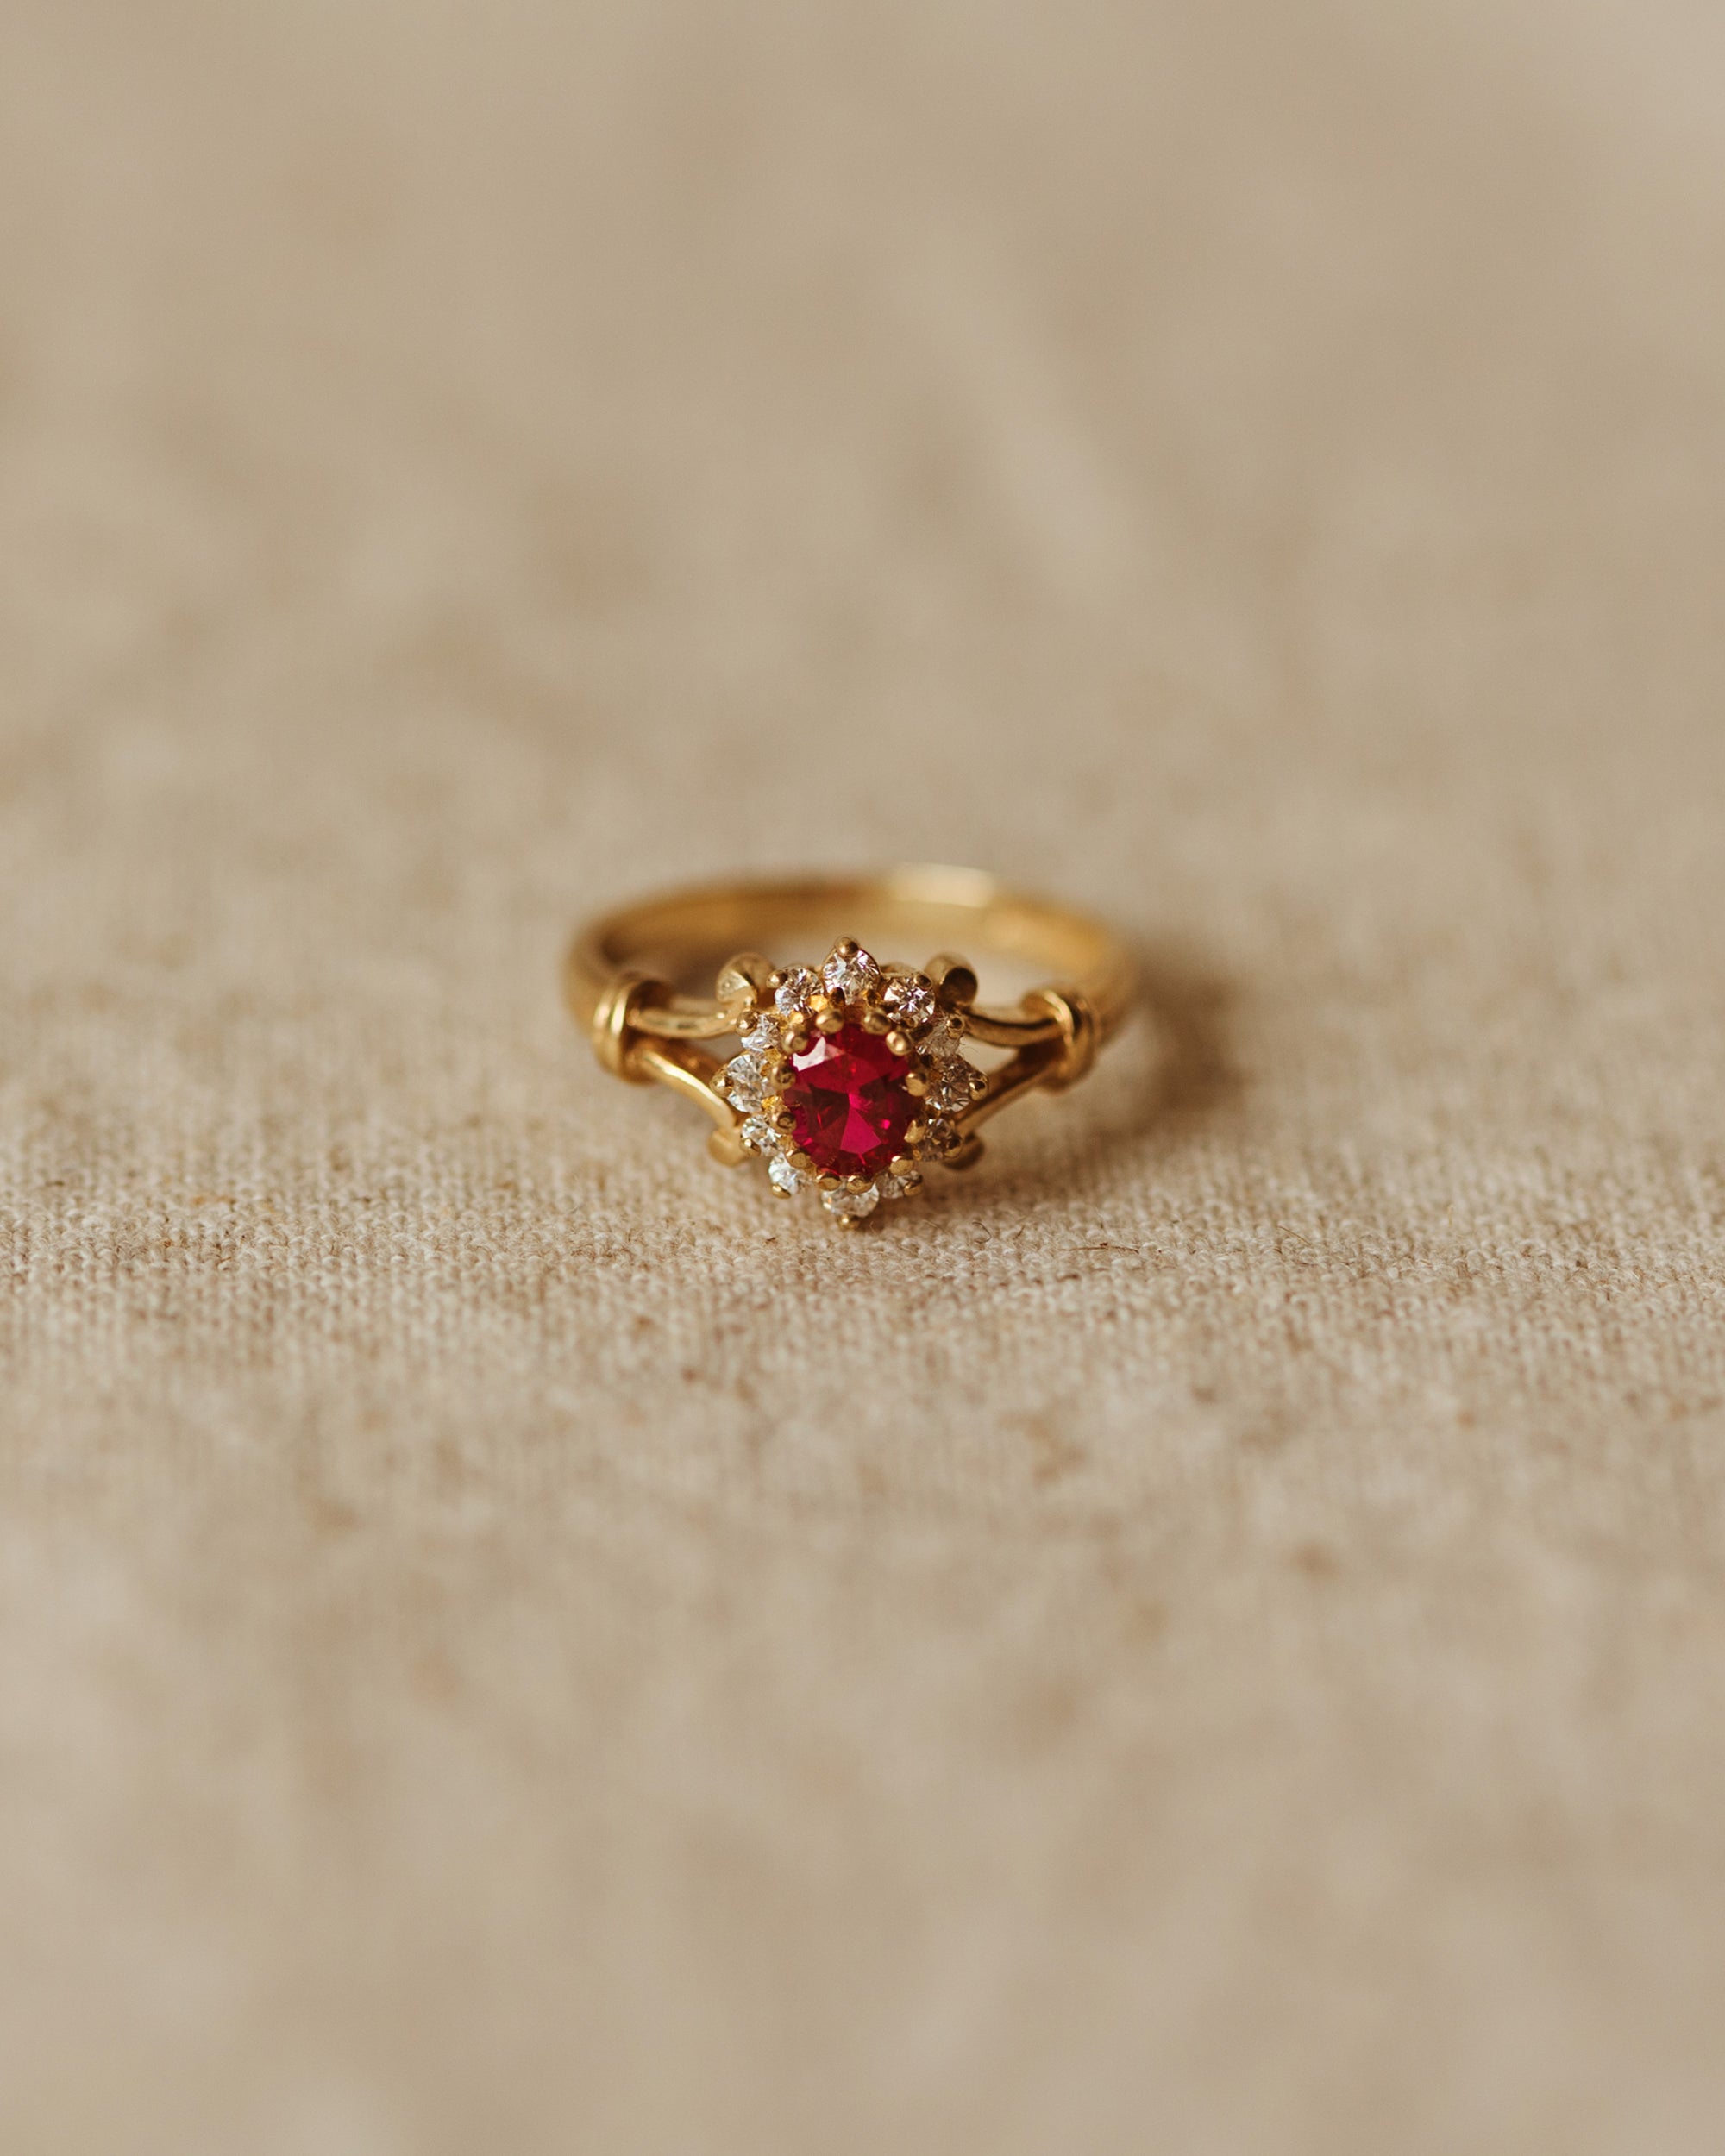 Vintage Ruby Jewelry - Men's Ruby and Gold Ring - Antique Jewelry | Vintage  Rings | Faberge EggsAntique Jewelry | Vintage Rings | Faberge Eggs